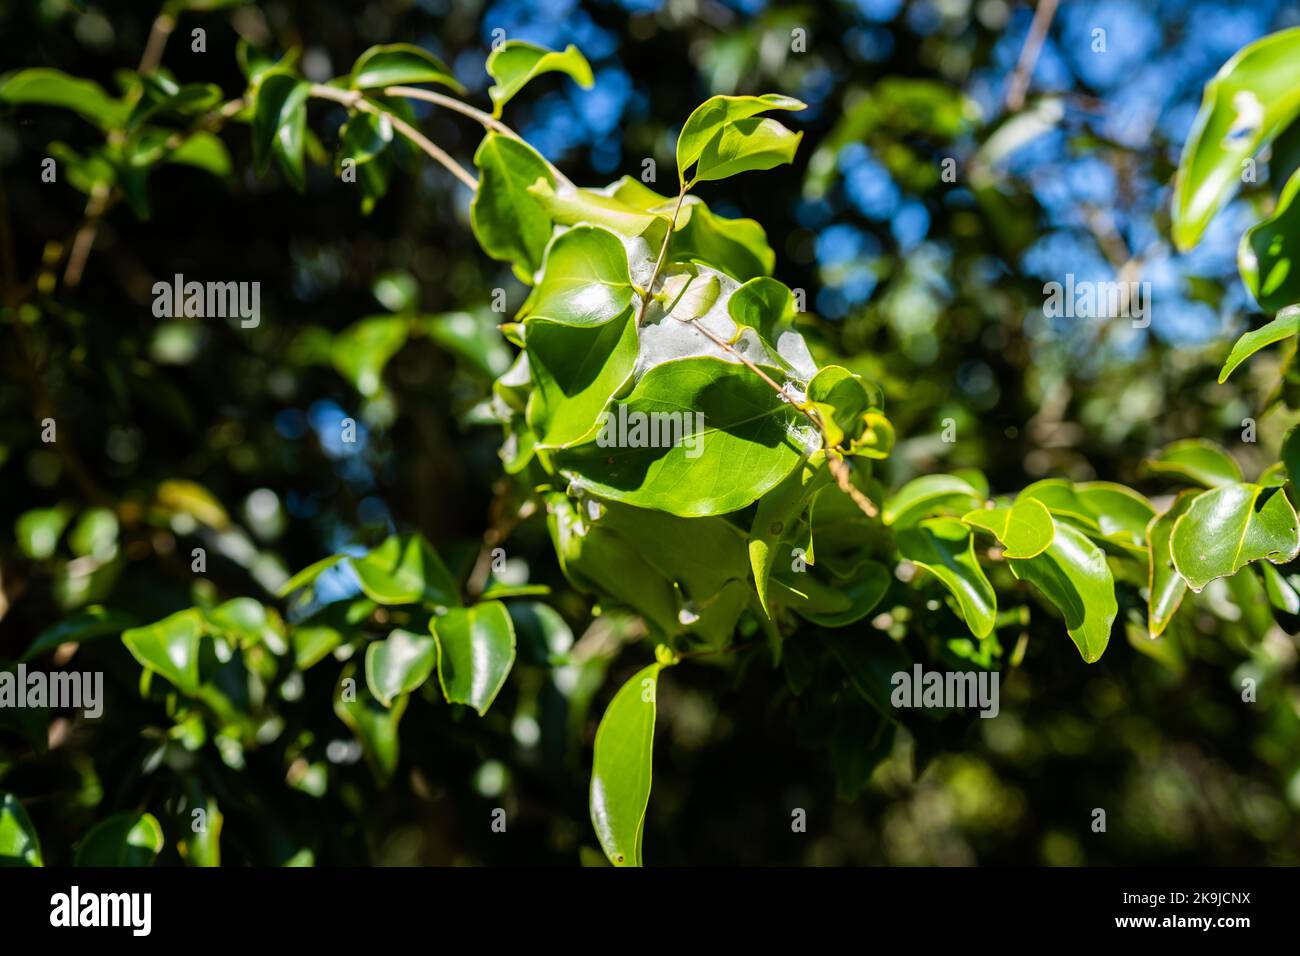 tropical plants growing in the wild and national park in queensland in spring Stock Photo